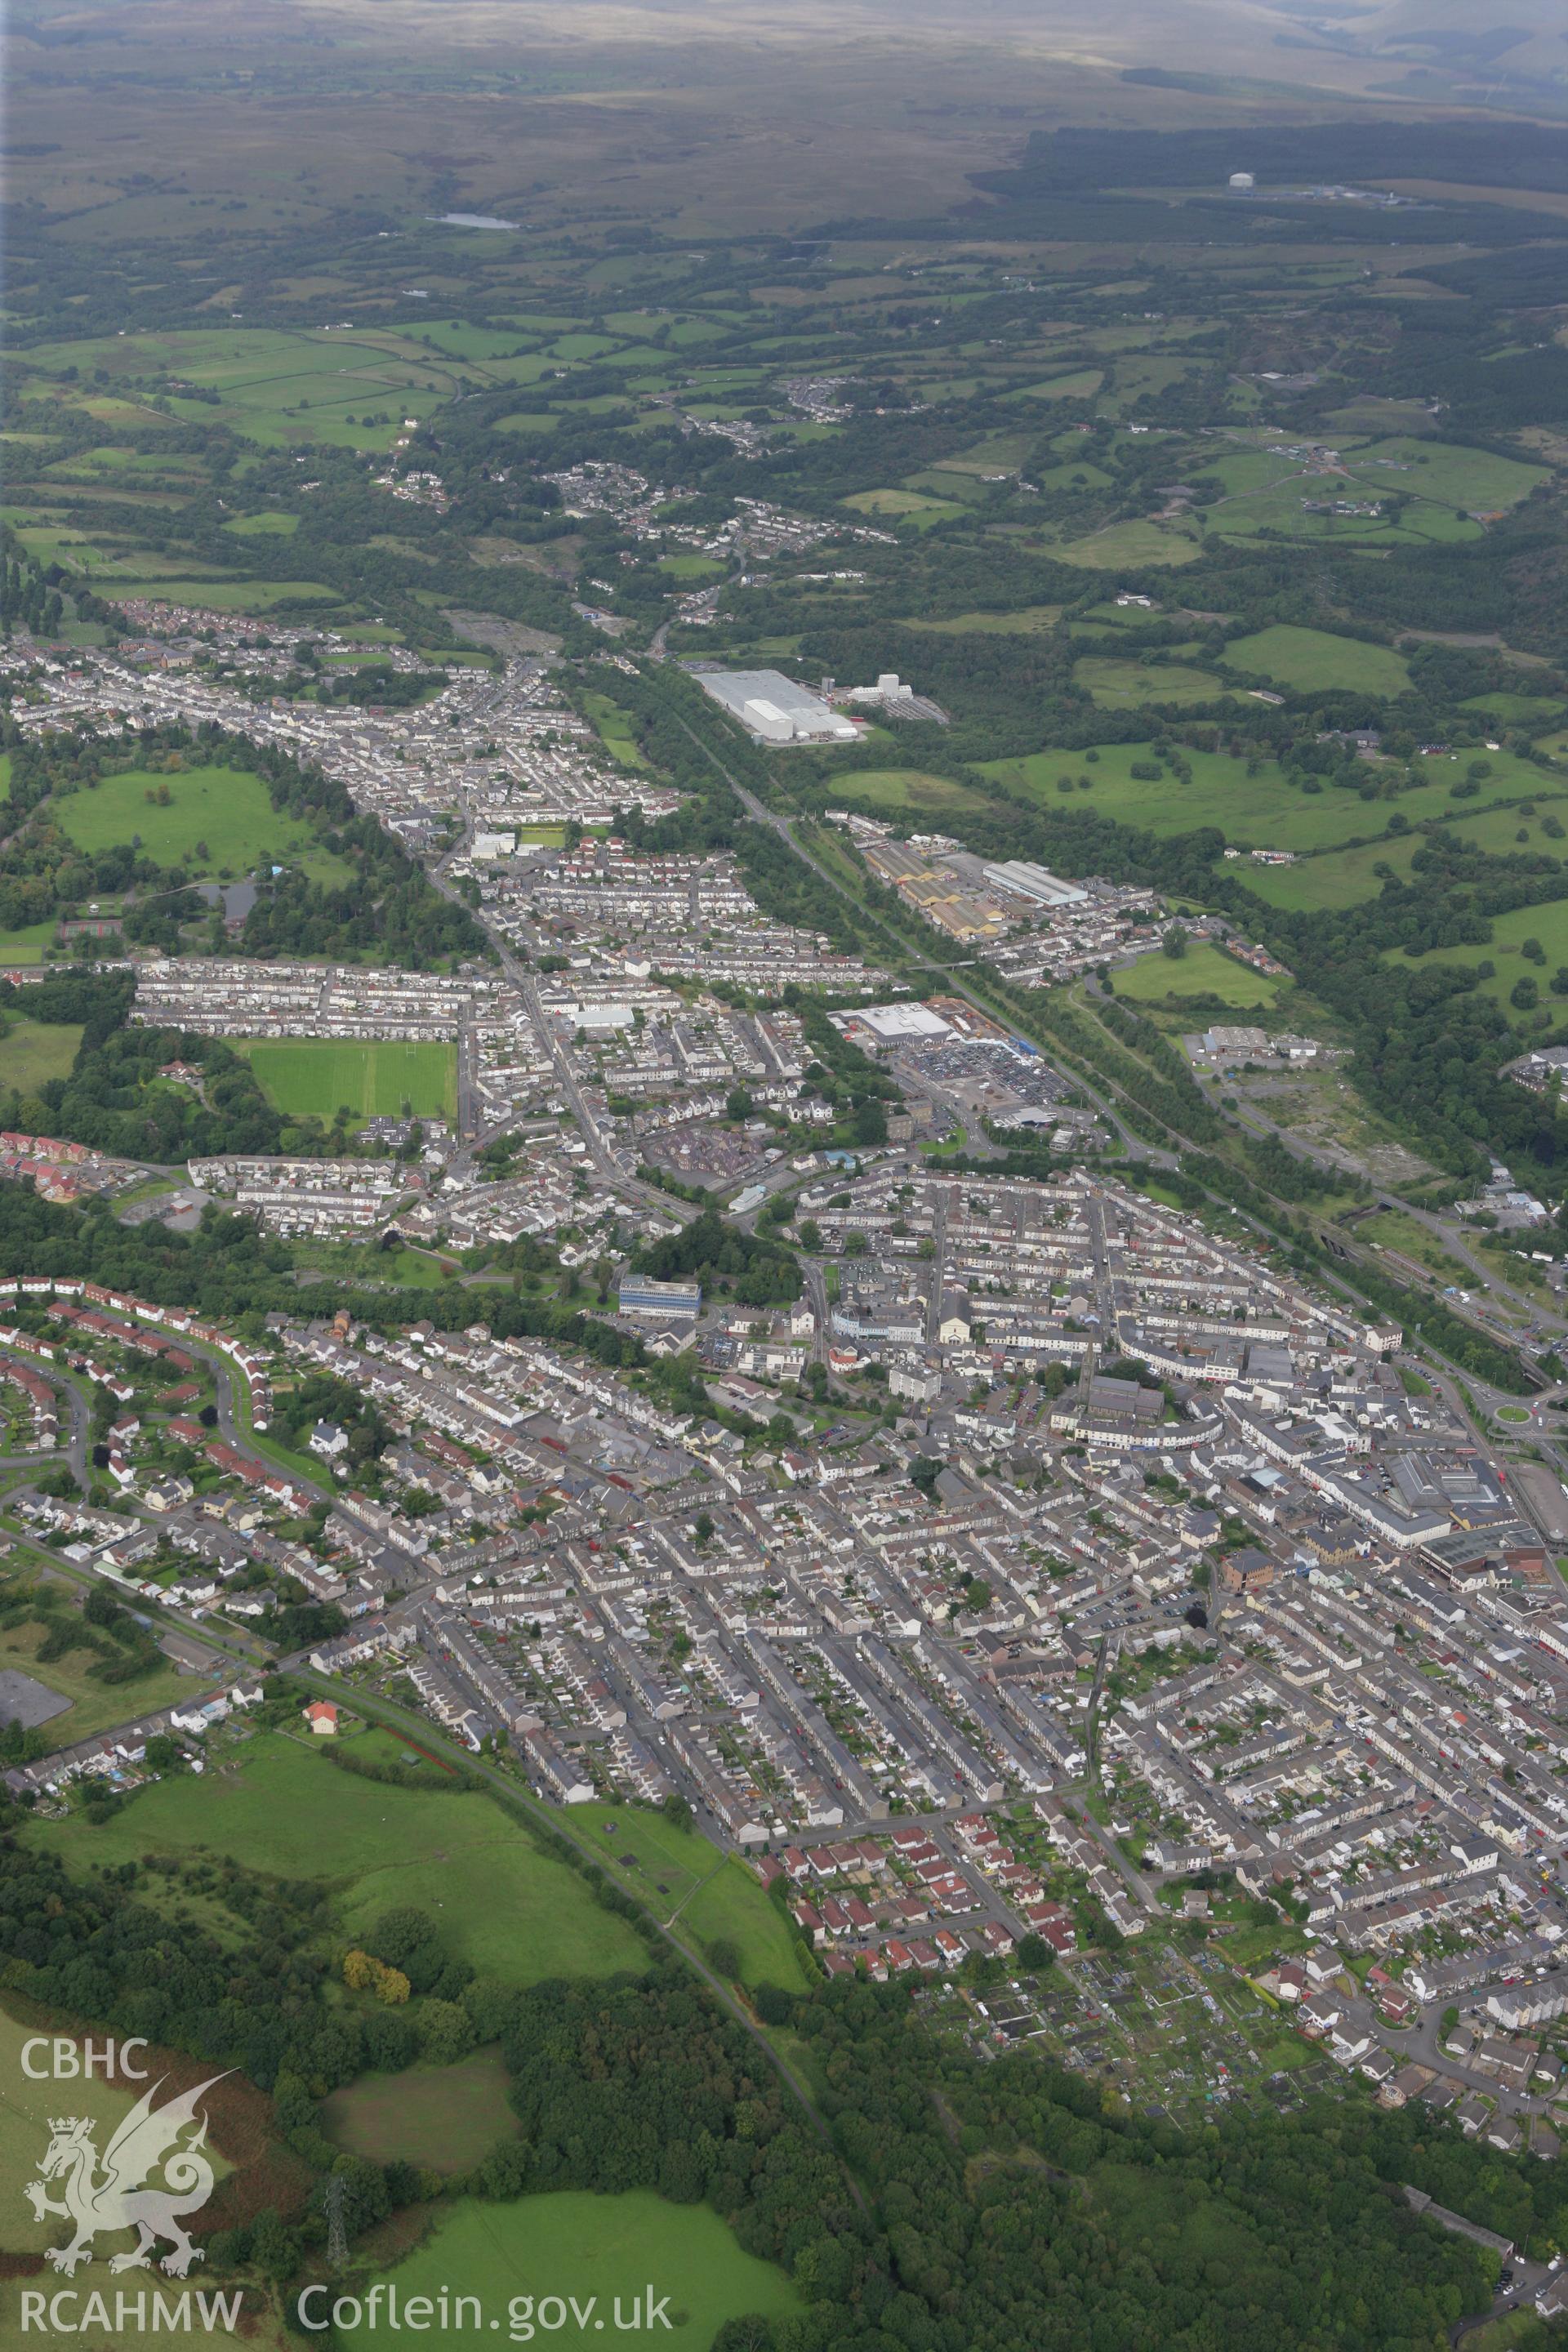 RCAHMW colour oblique photograph of Aberdare townscape, from the south-east. Taken by Toby Driver on 12/09/2008.